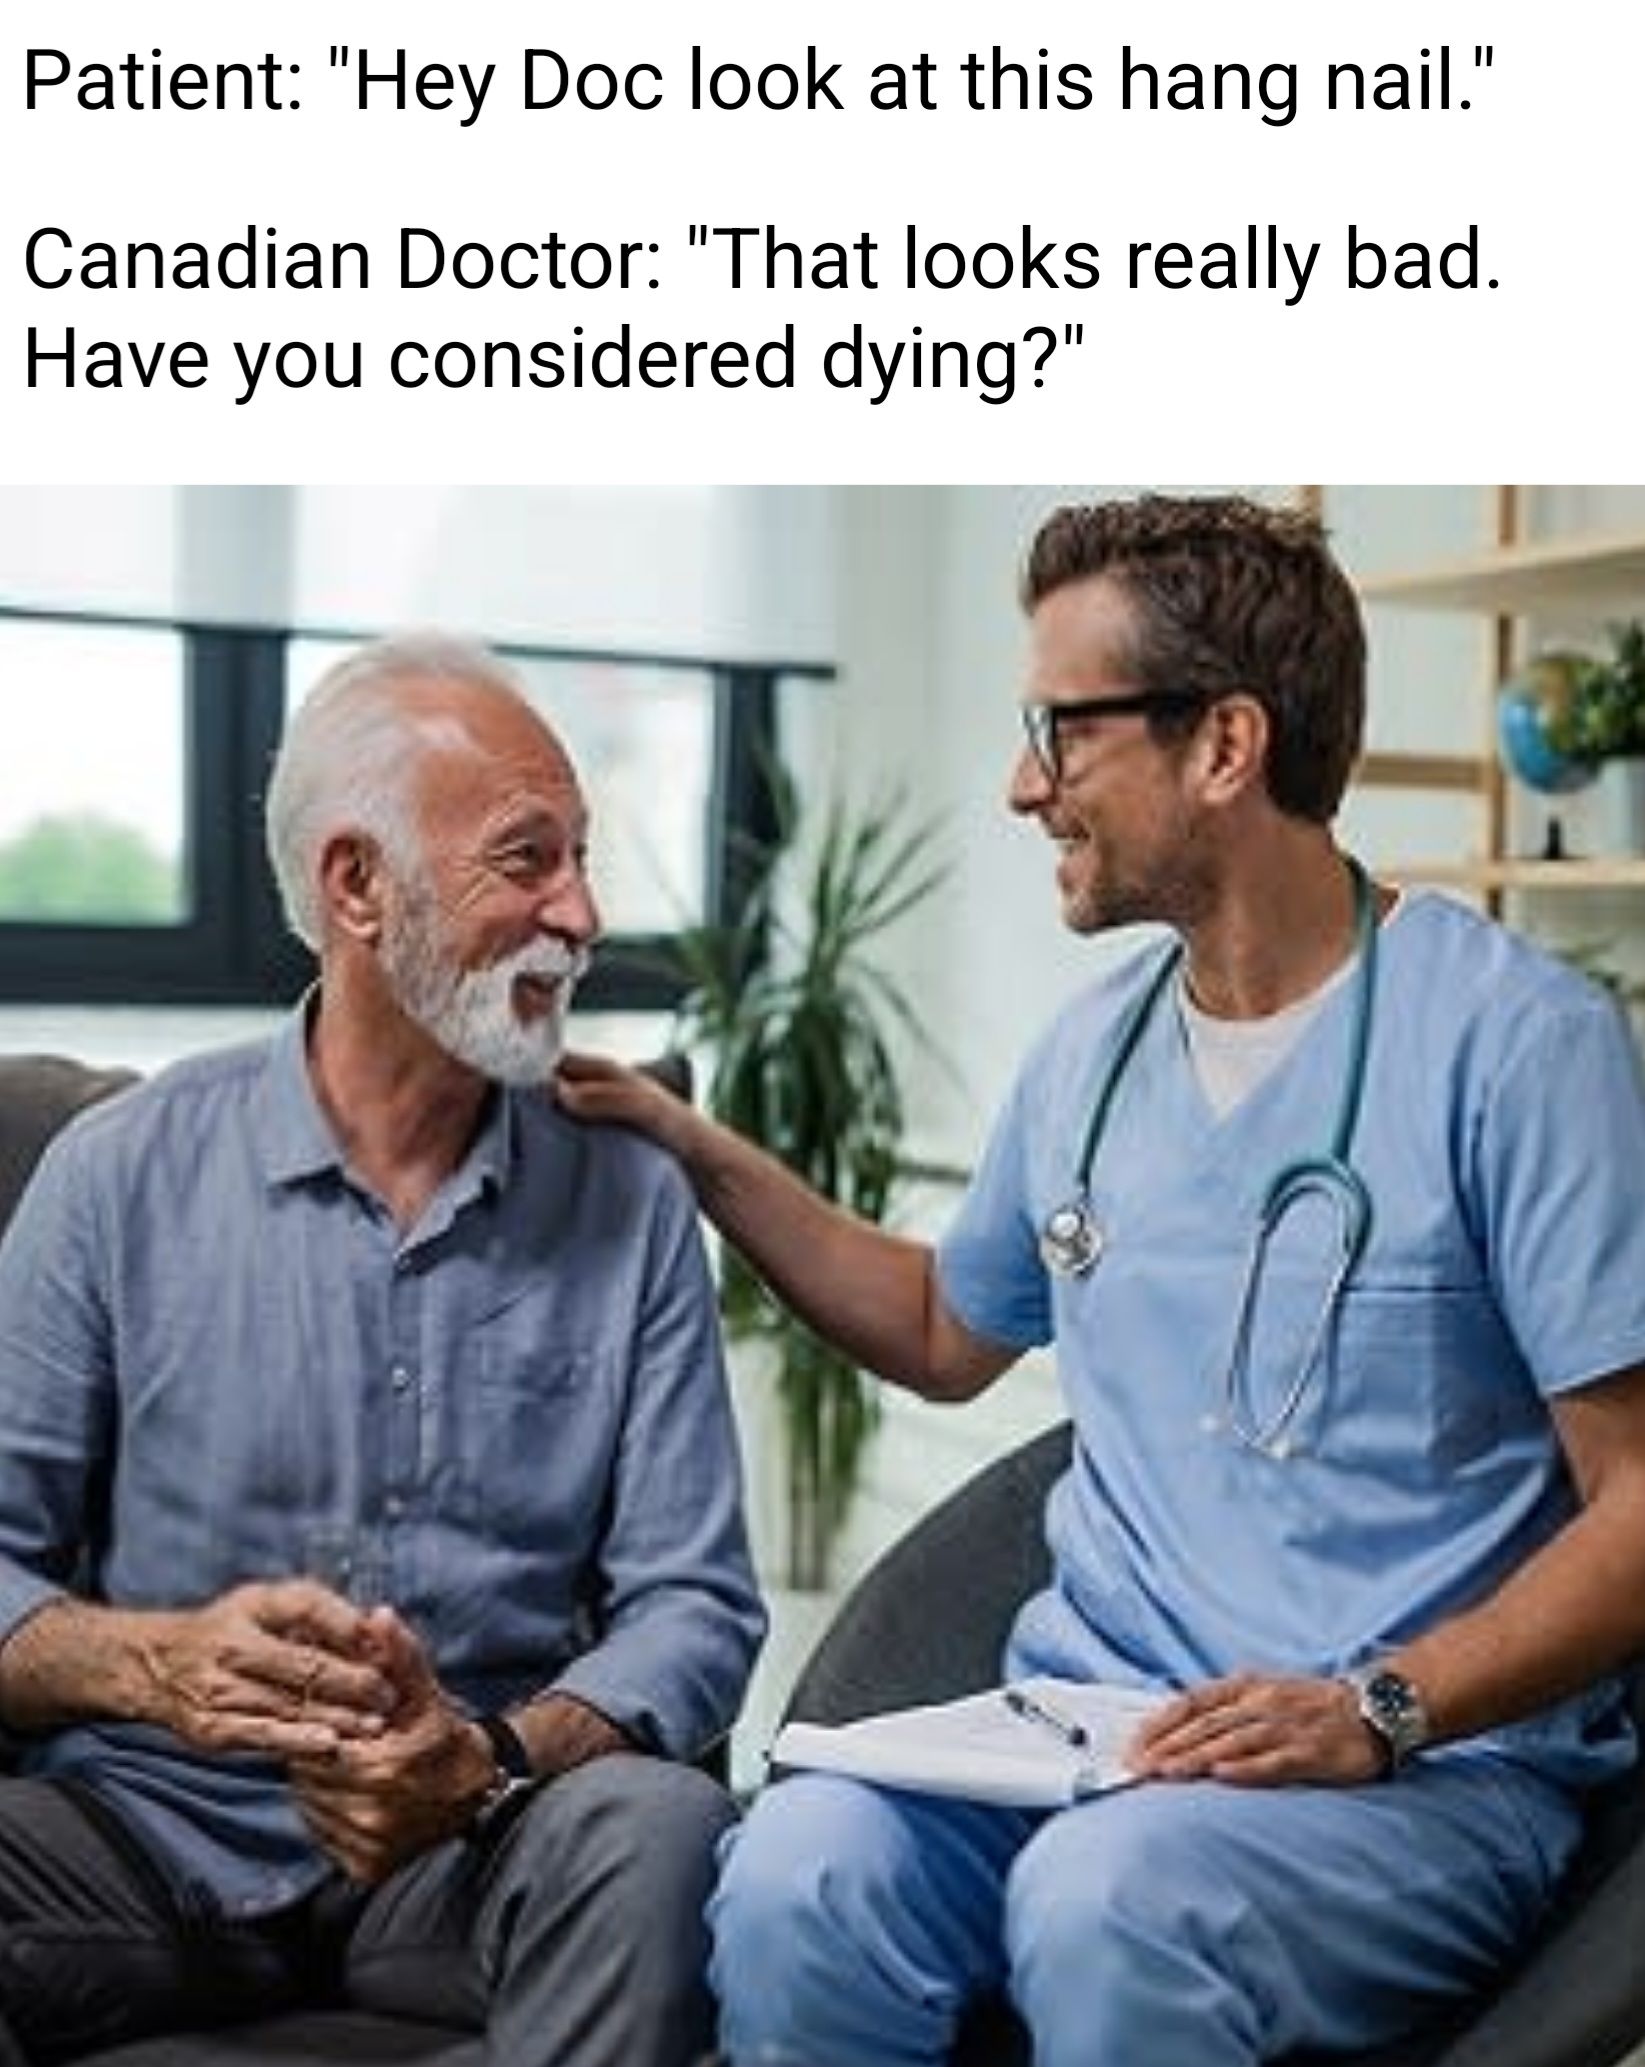 Canadian Doctor gives some advice